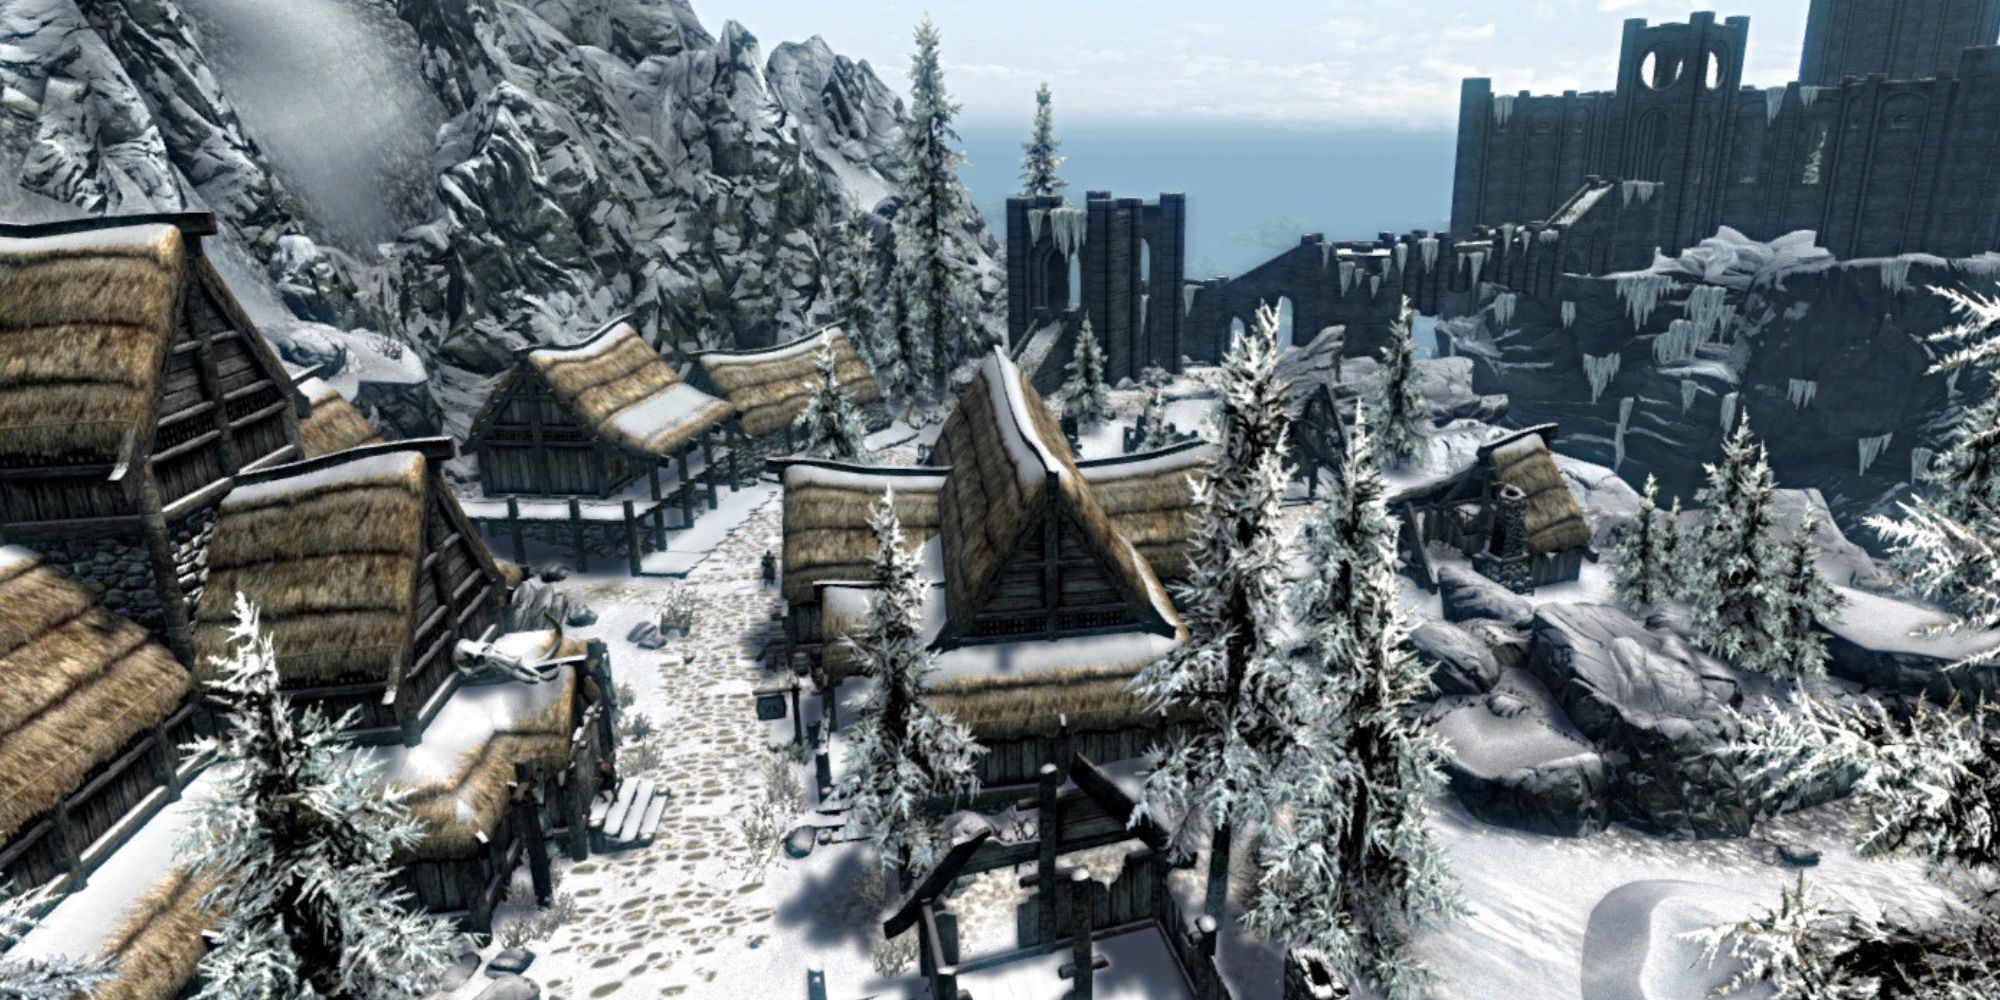 An aerial view of Winterhold from Skyrin